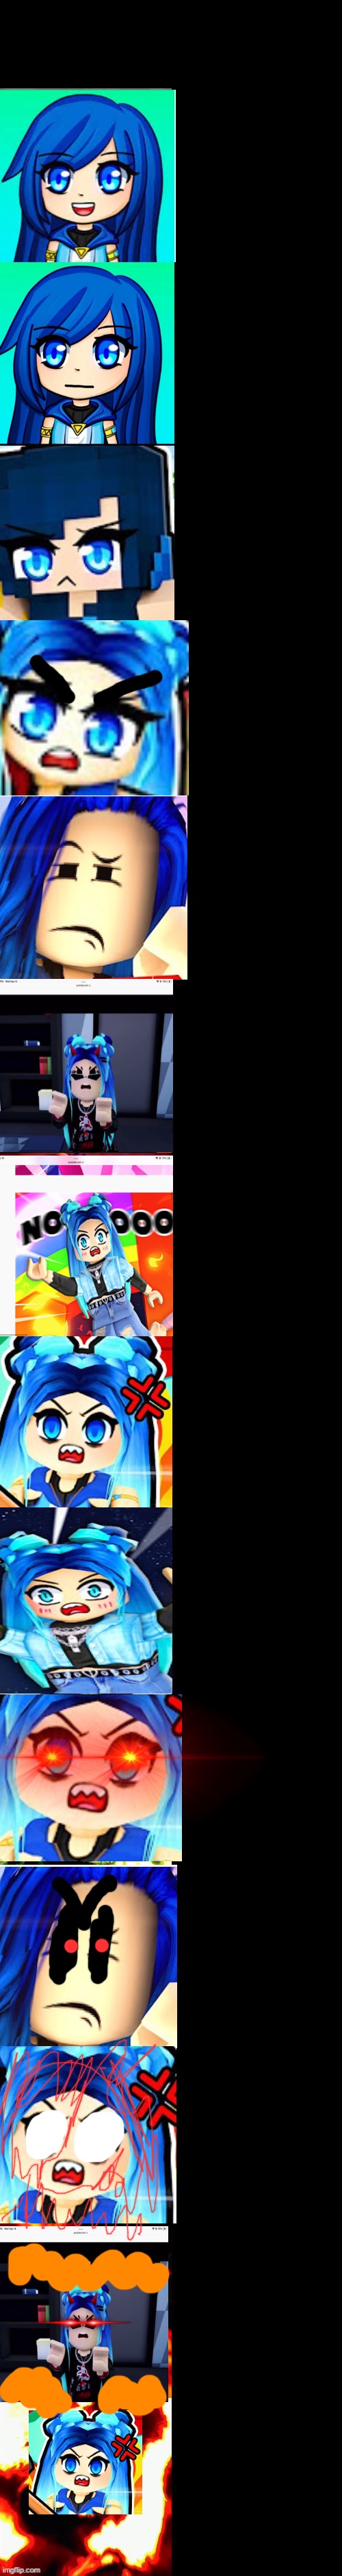 Itsfunneh becoming Angry (Extended) Blank Meme Template